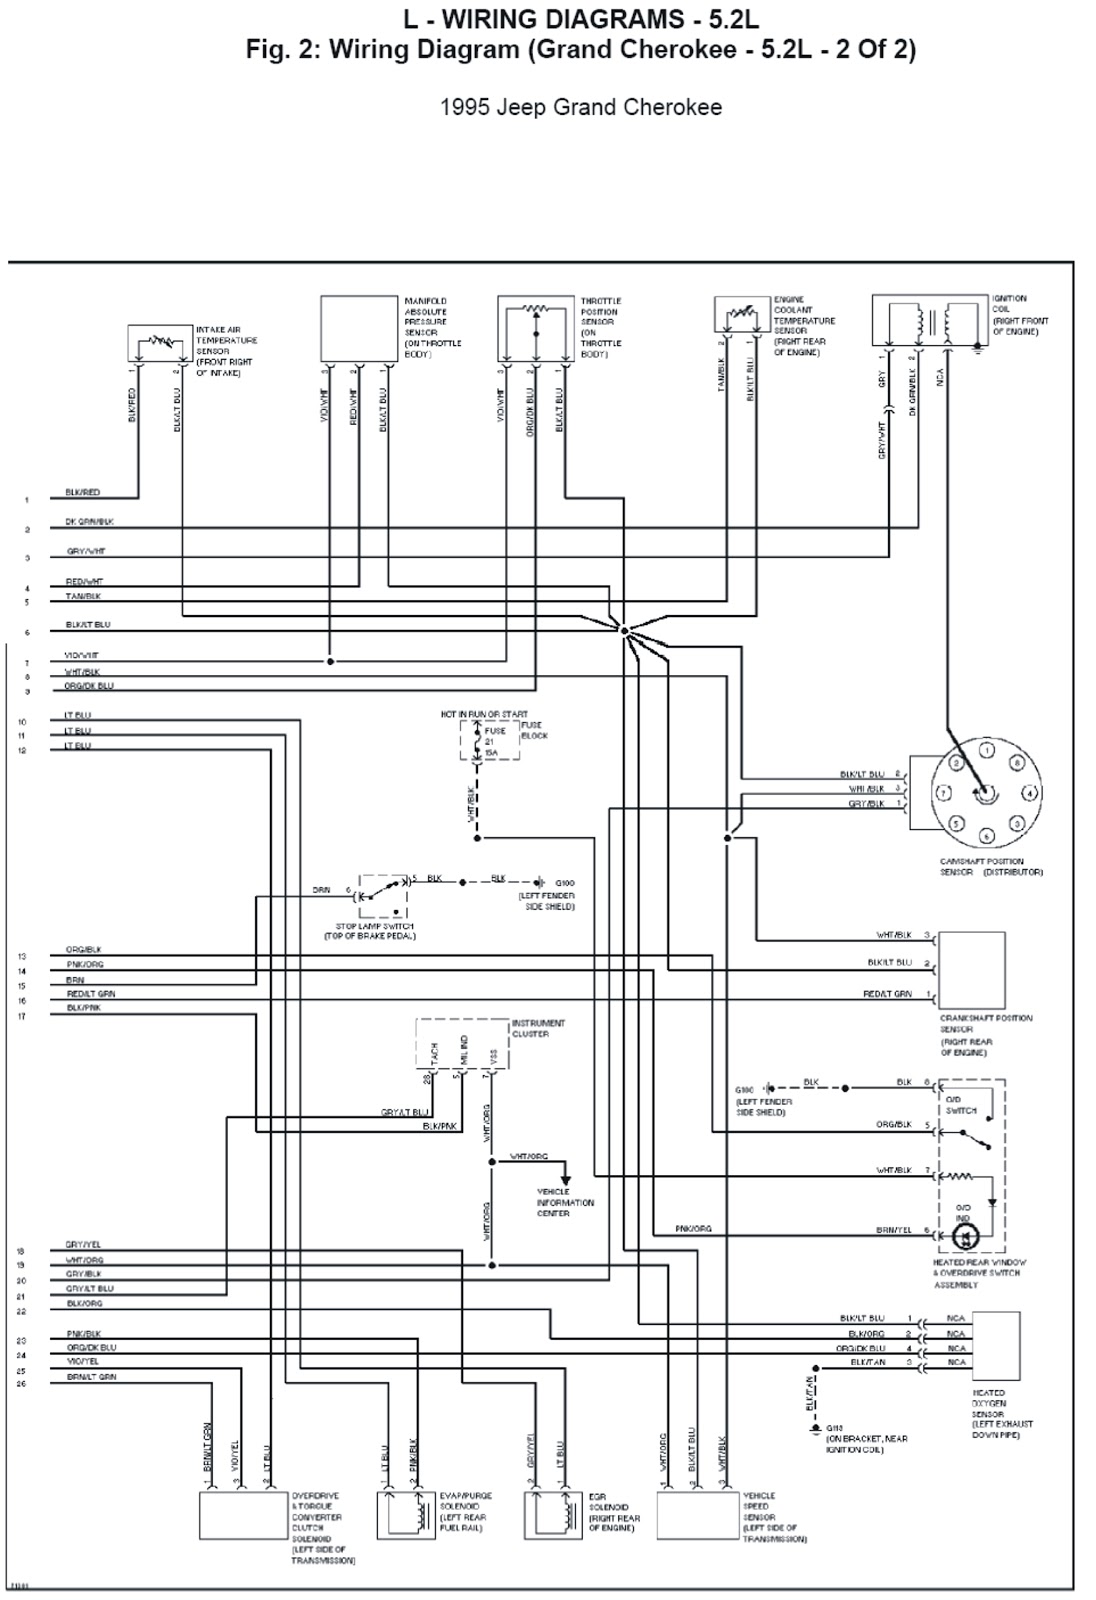 2005 Jeep Grand Cherokee Stereo Wiring Diagram Case 1825 Wiring Diagram Bege Wiring Diagram